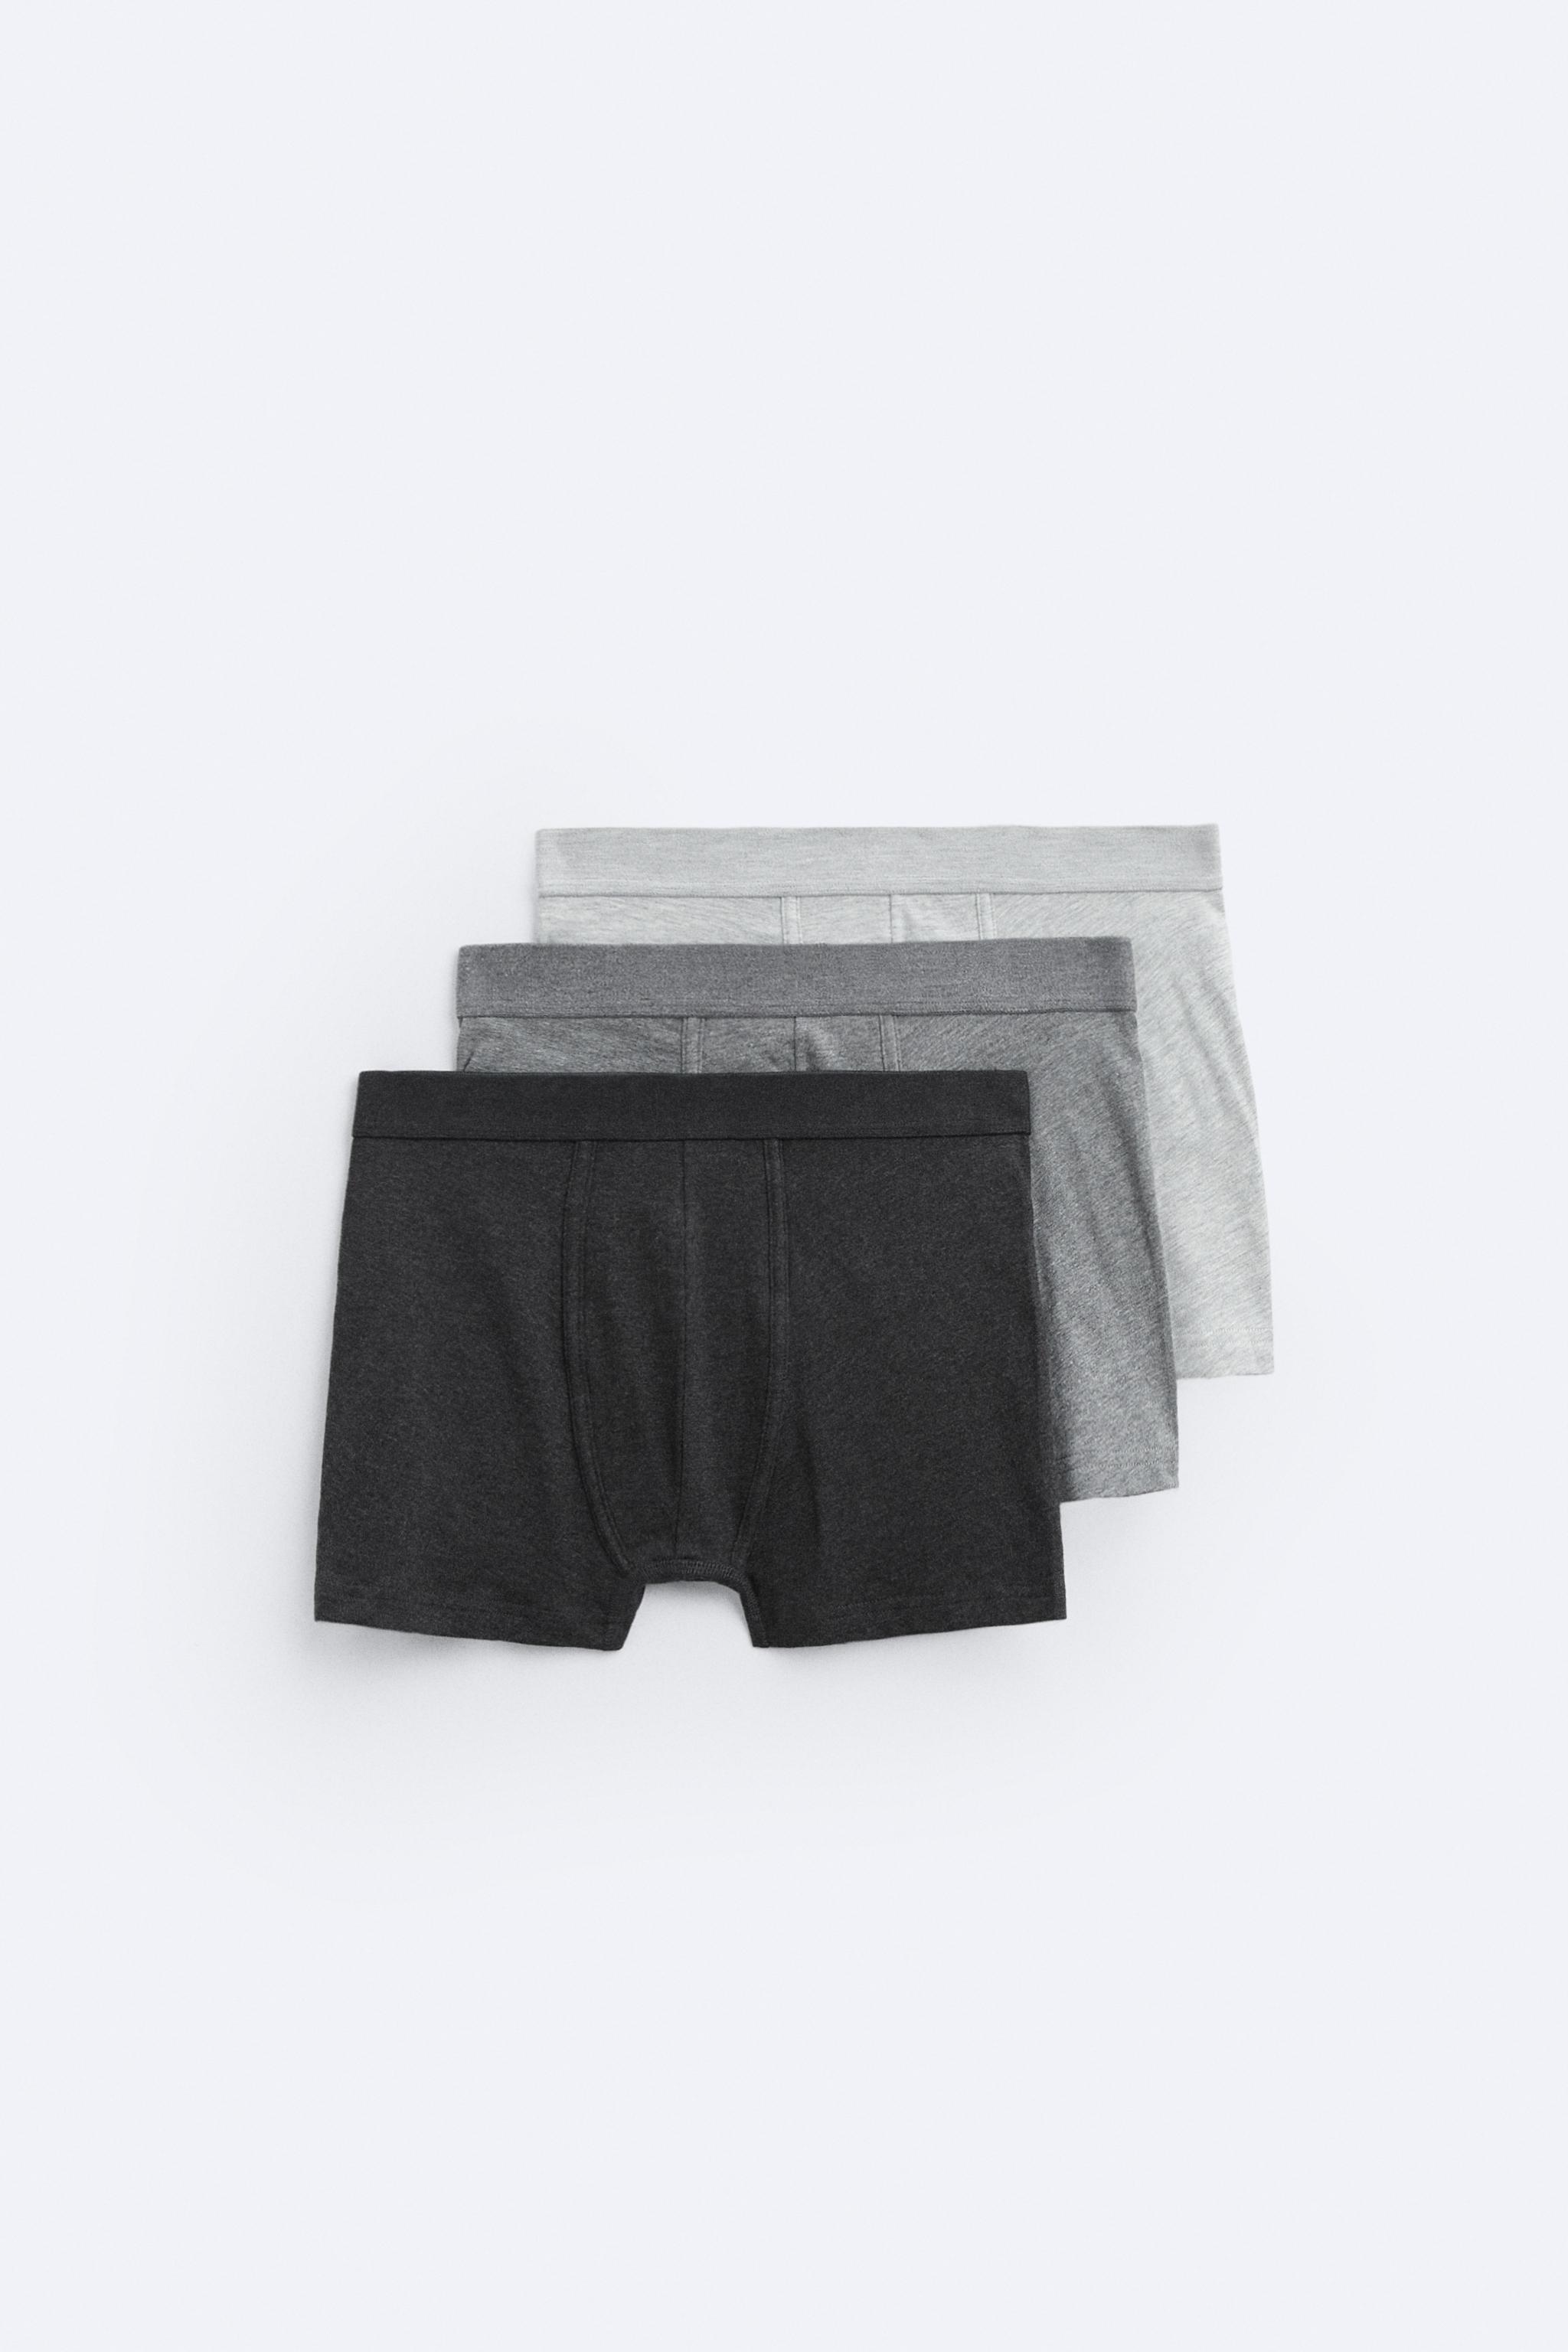 3 PACK OF COMBINATION BOXERS - various